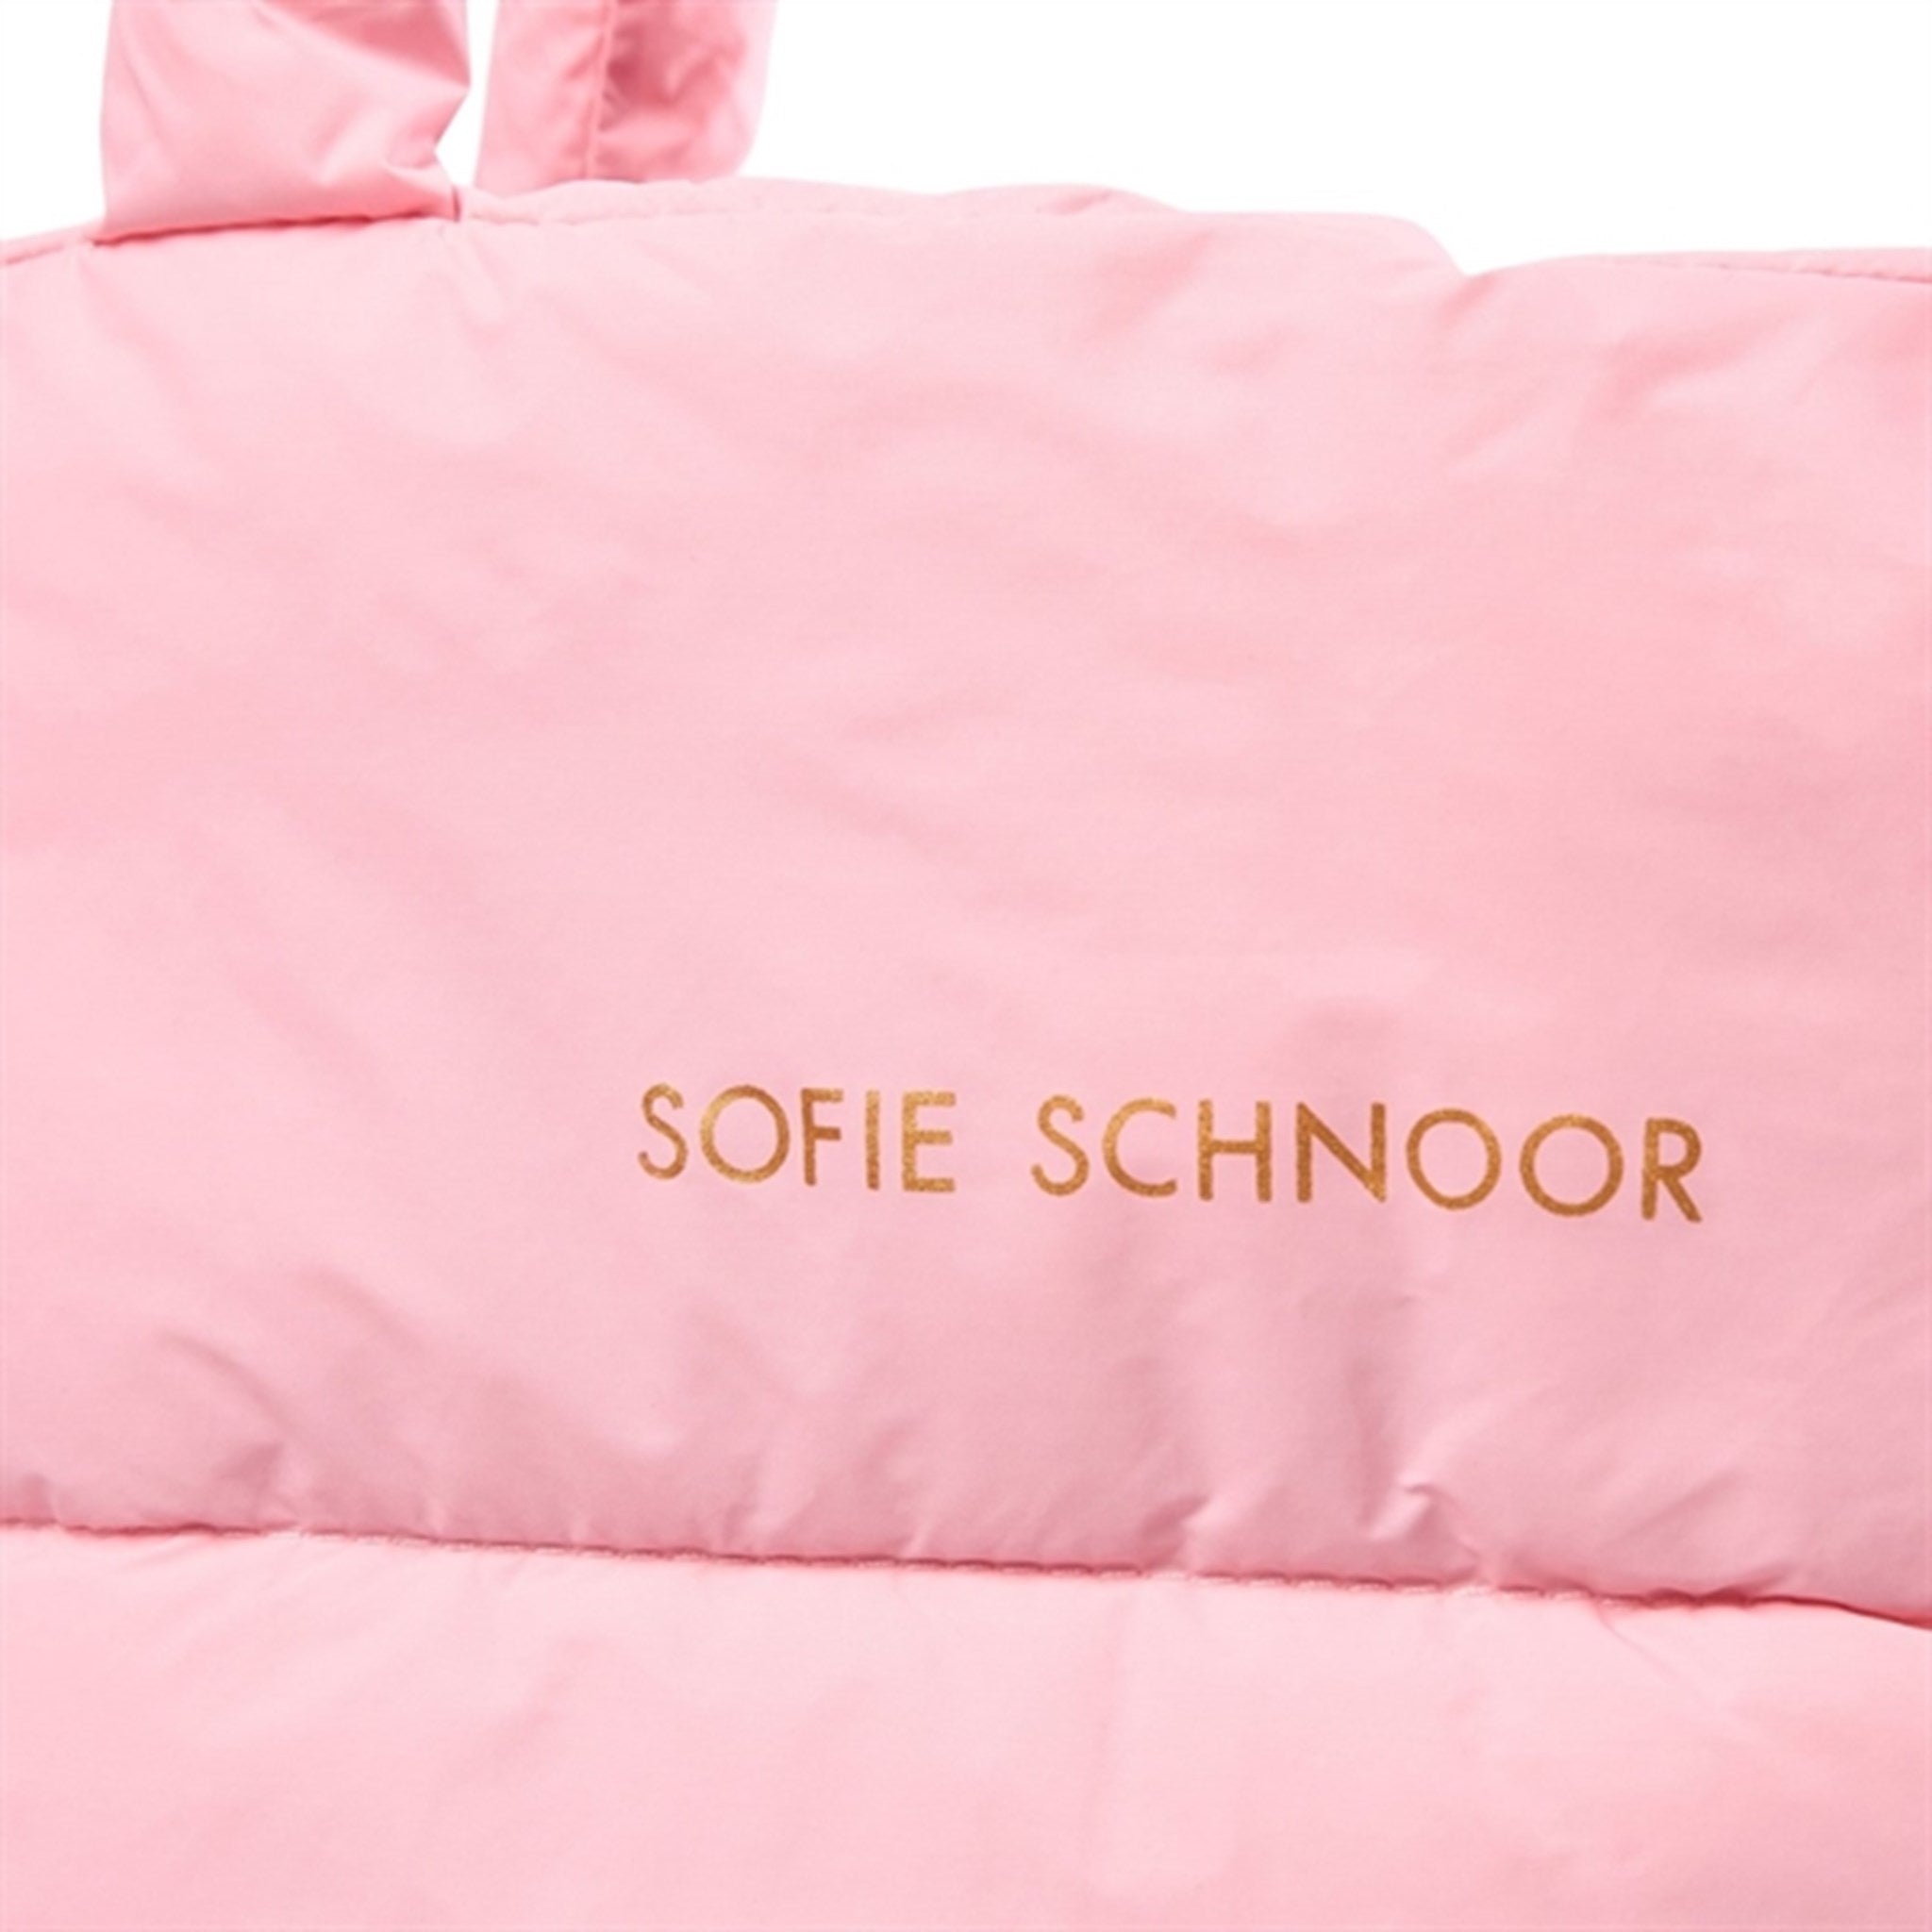 Sofie Schnoor Young Totebag Rose 2